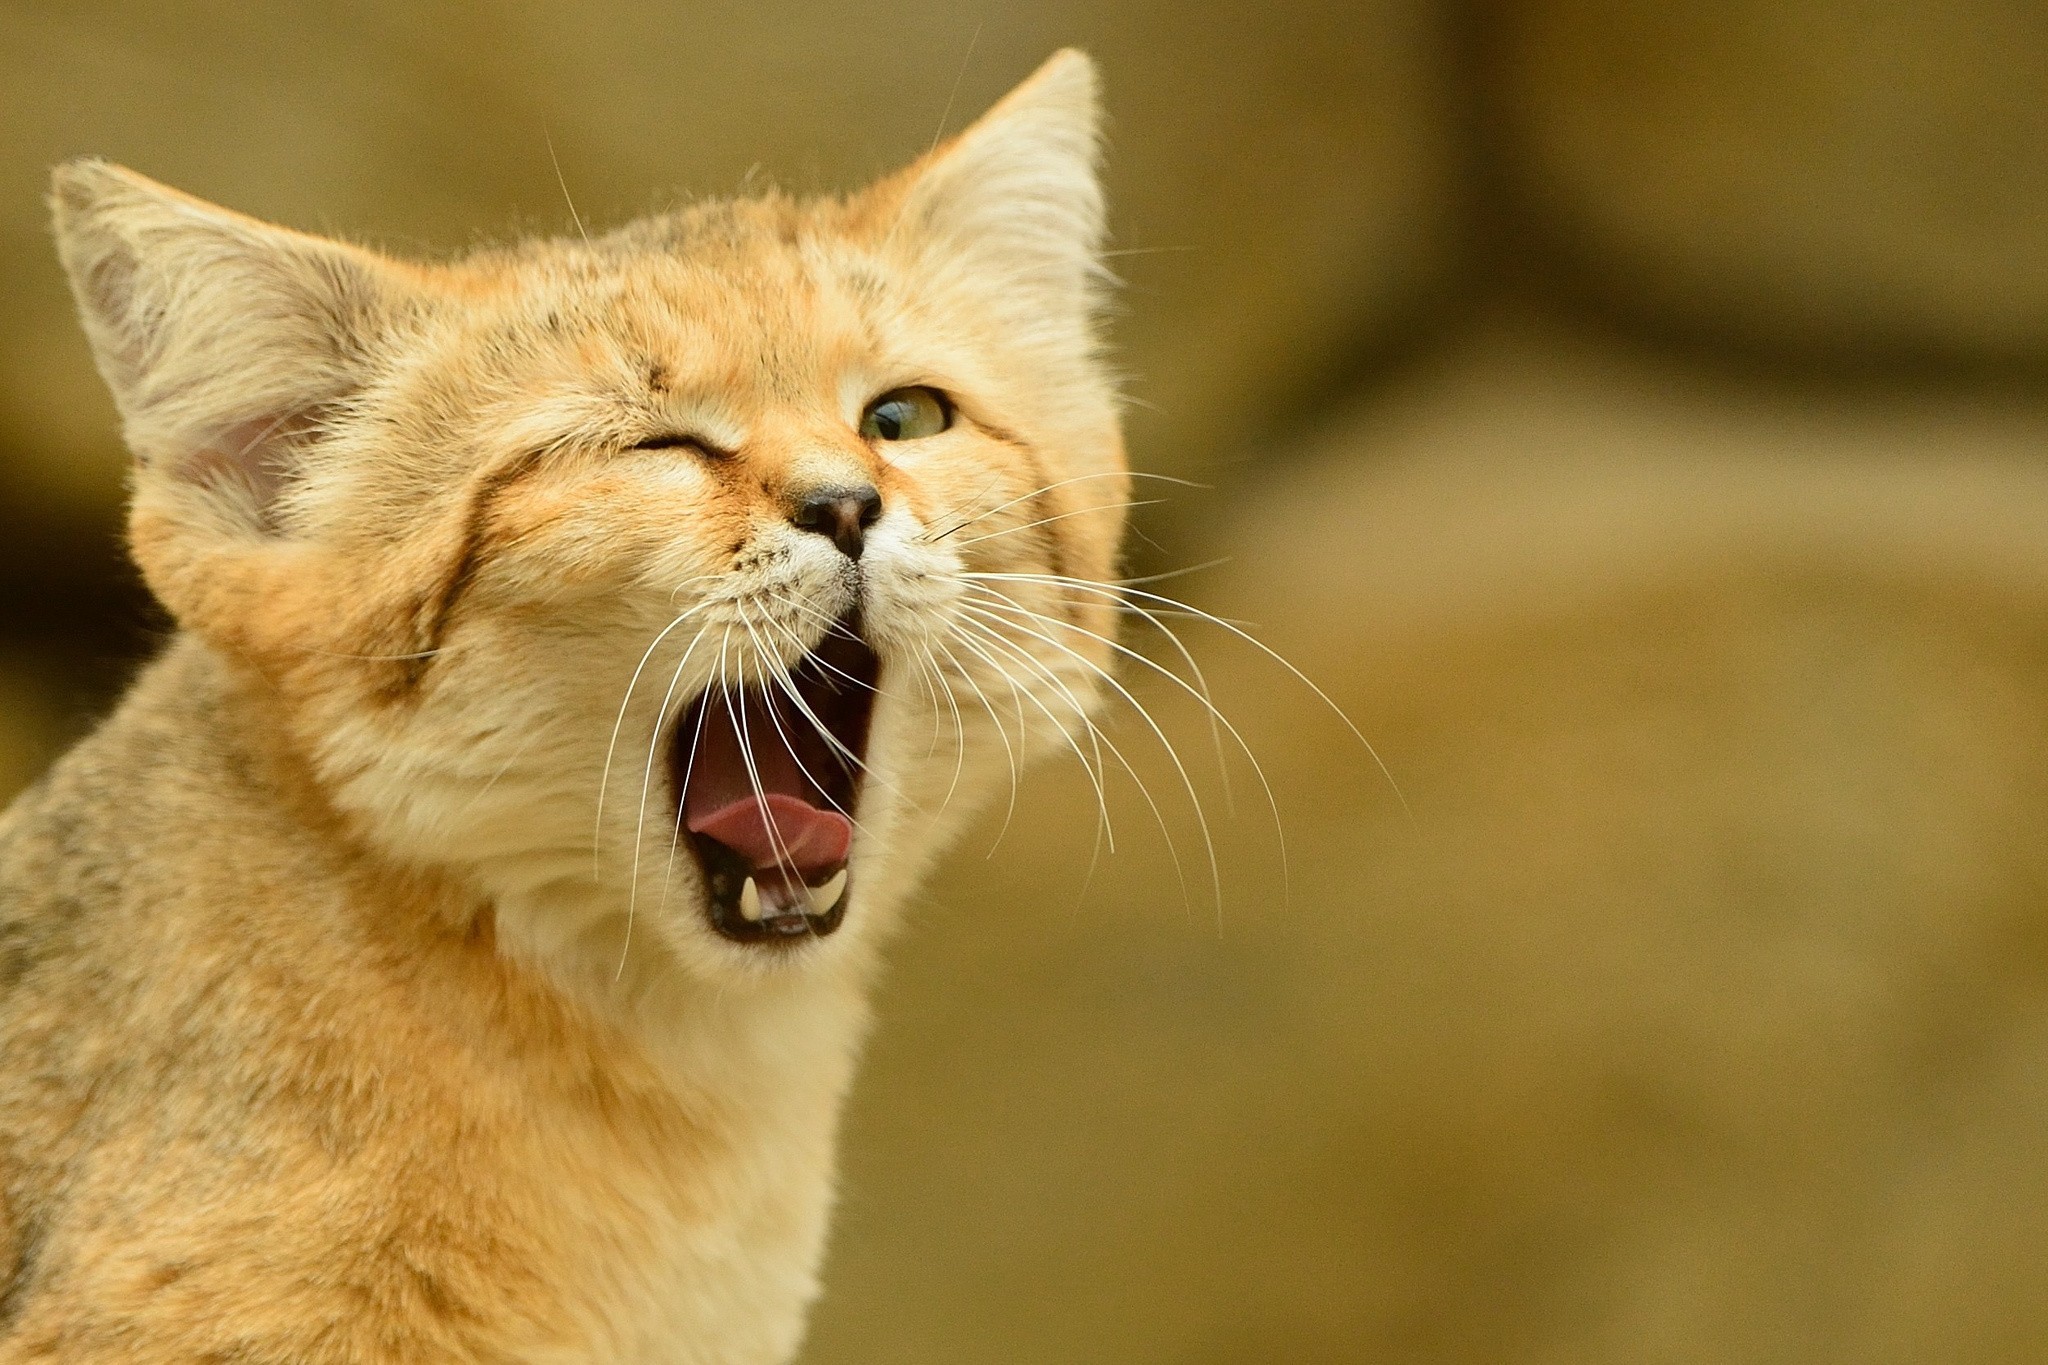 caturday gif of a sand cat yawning